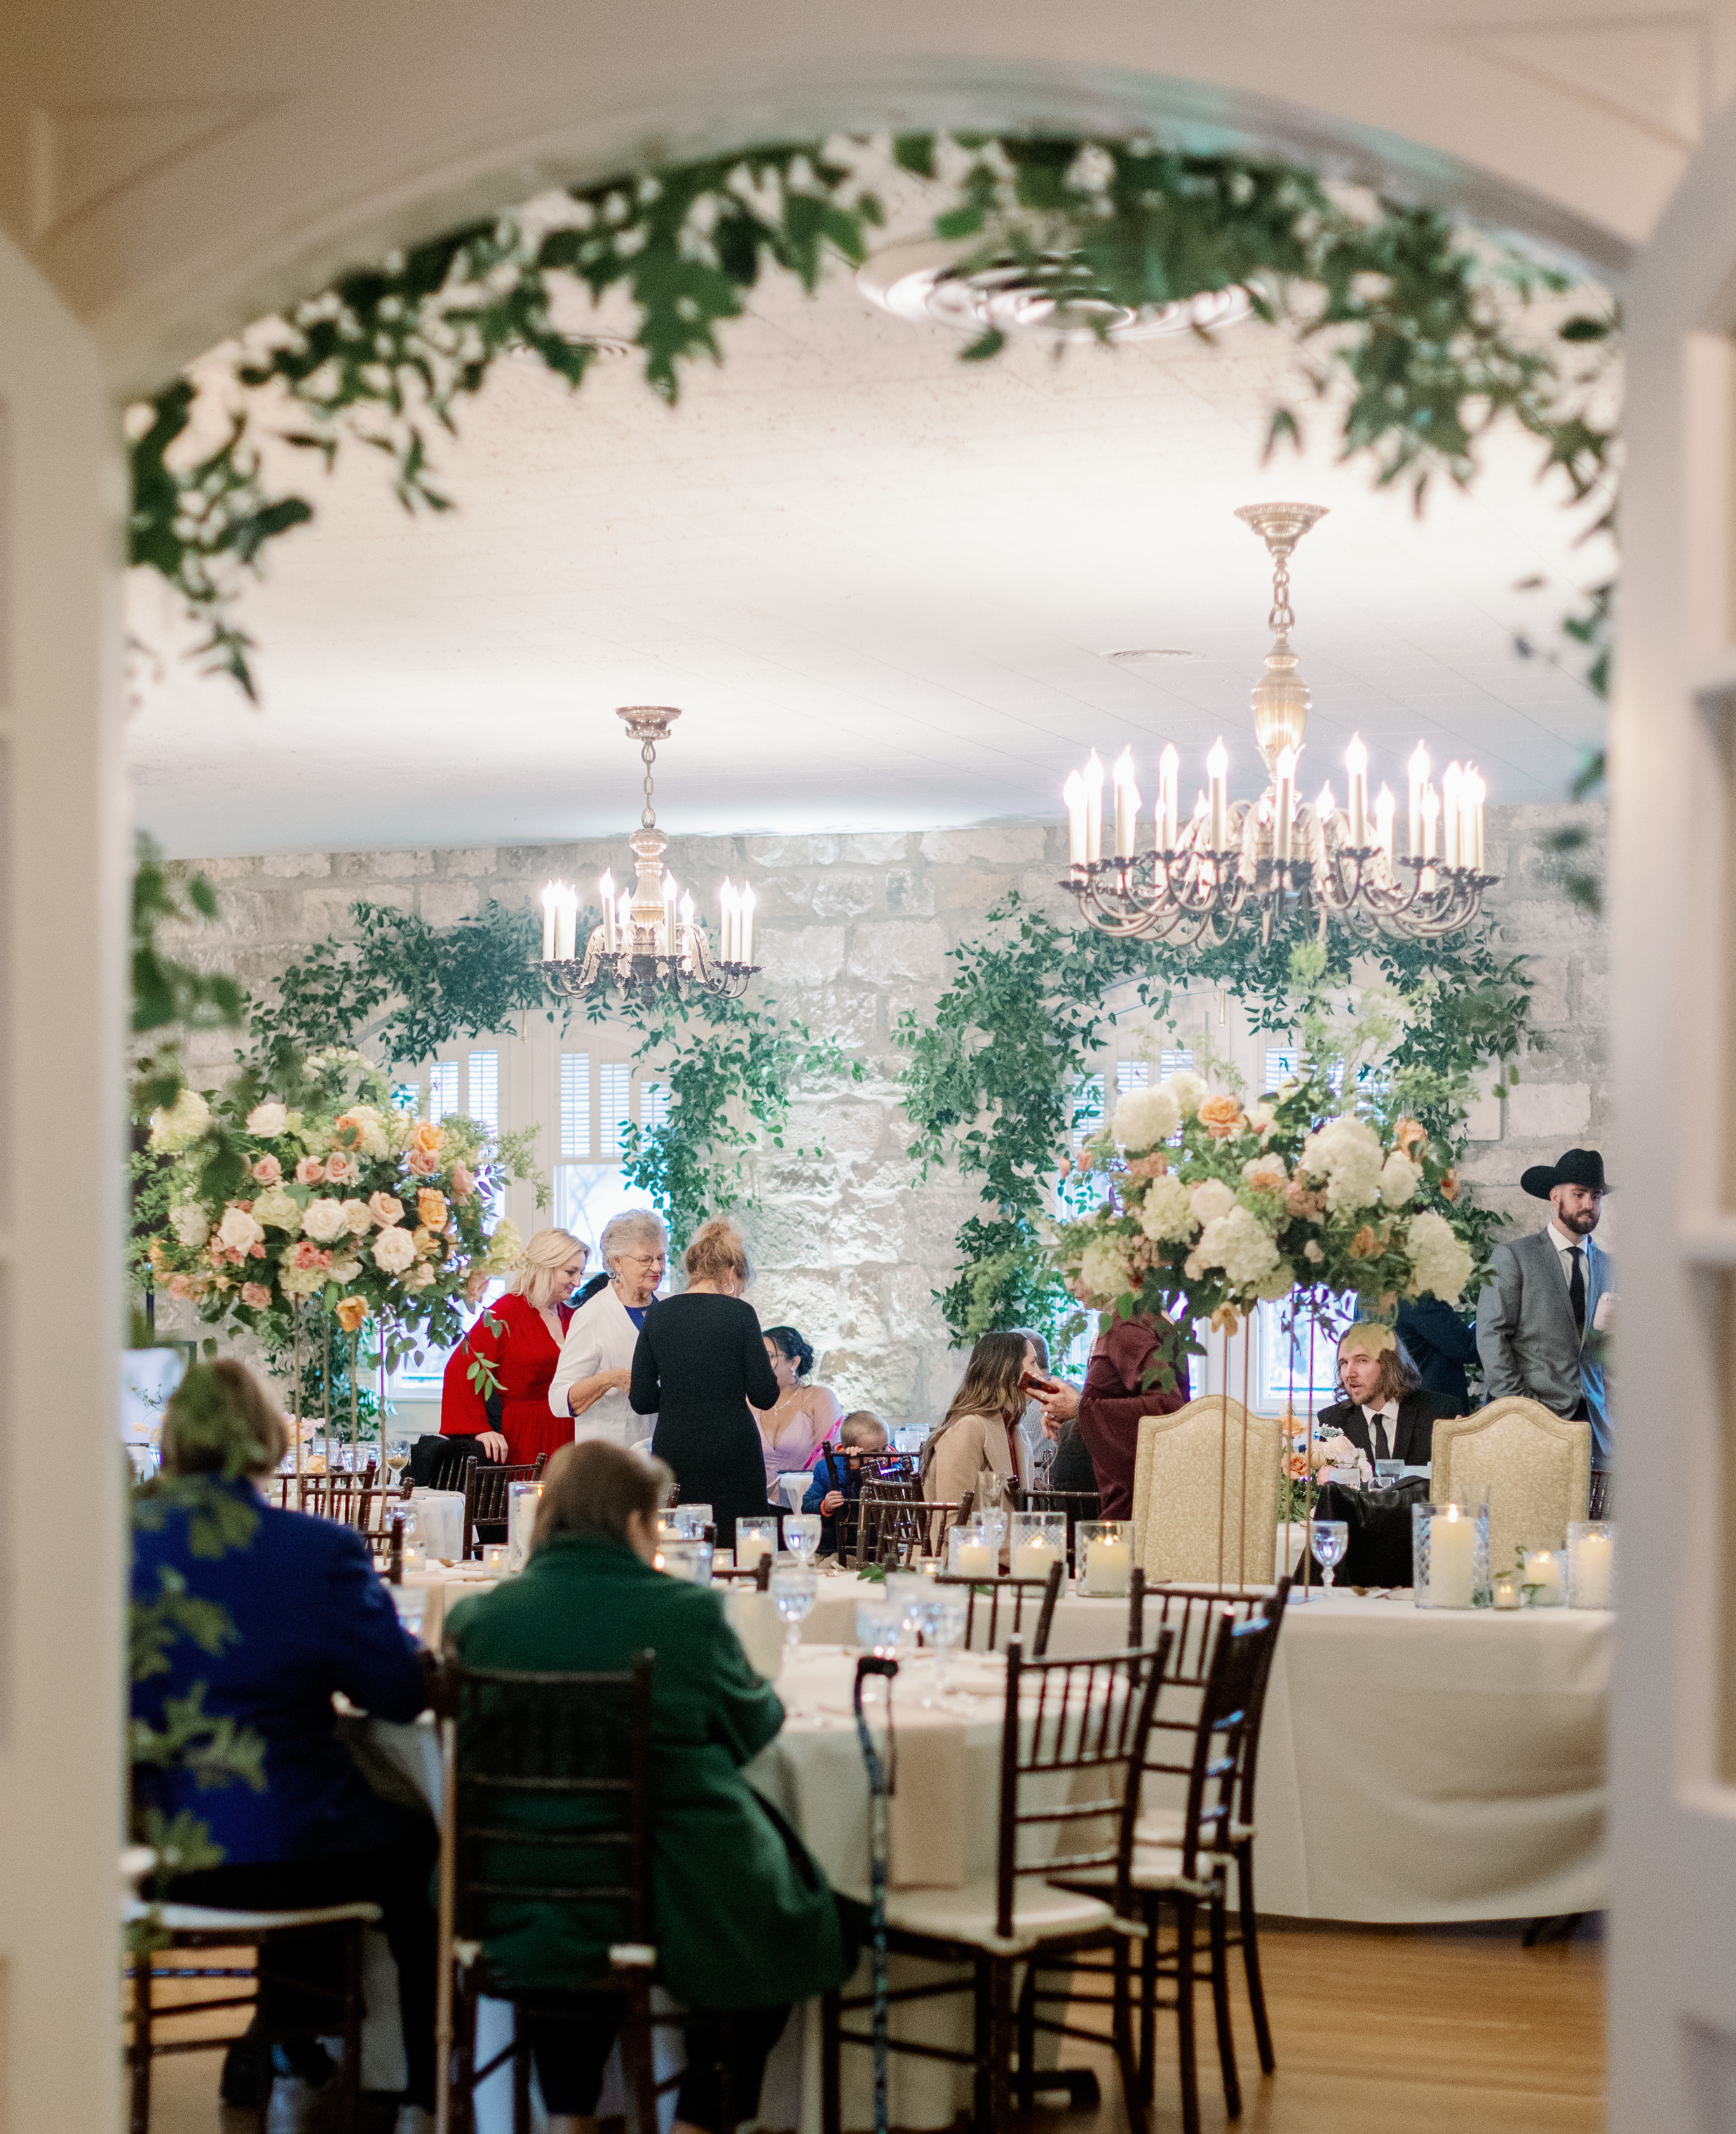 Guests start filling the wedding reception room for an early spring romance wedding in Austin, TX.